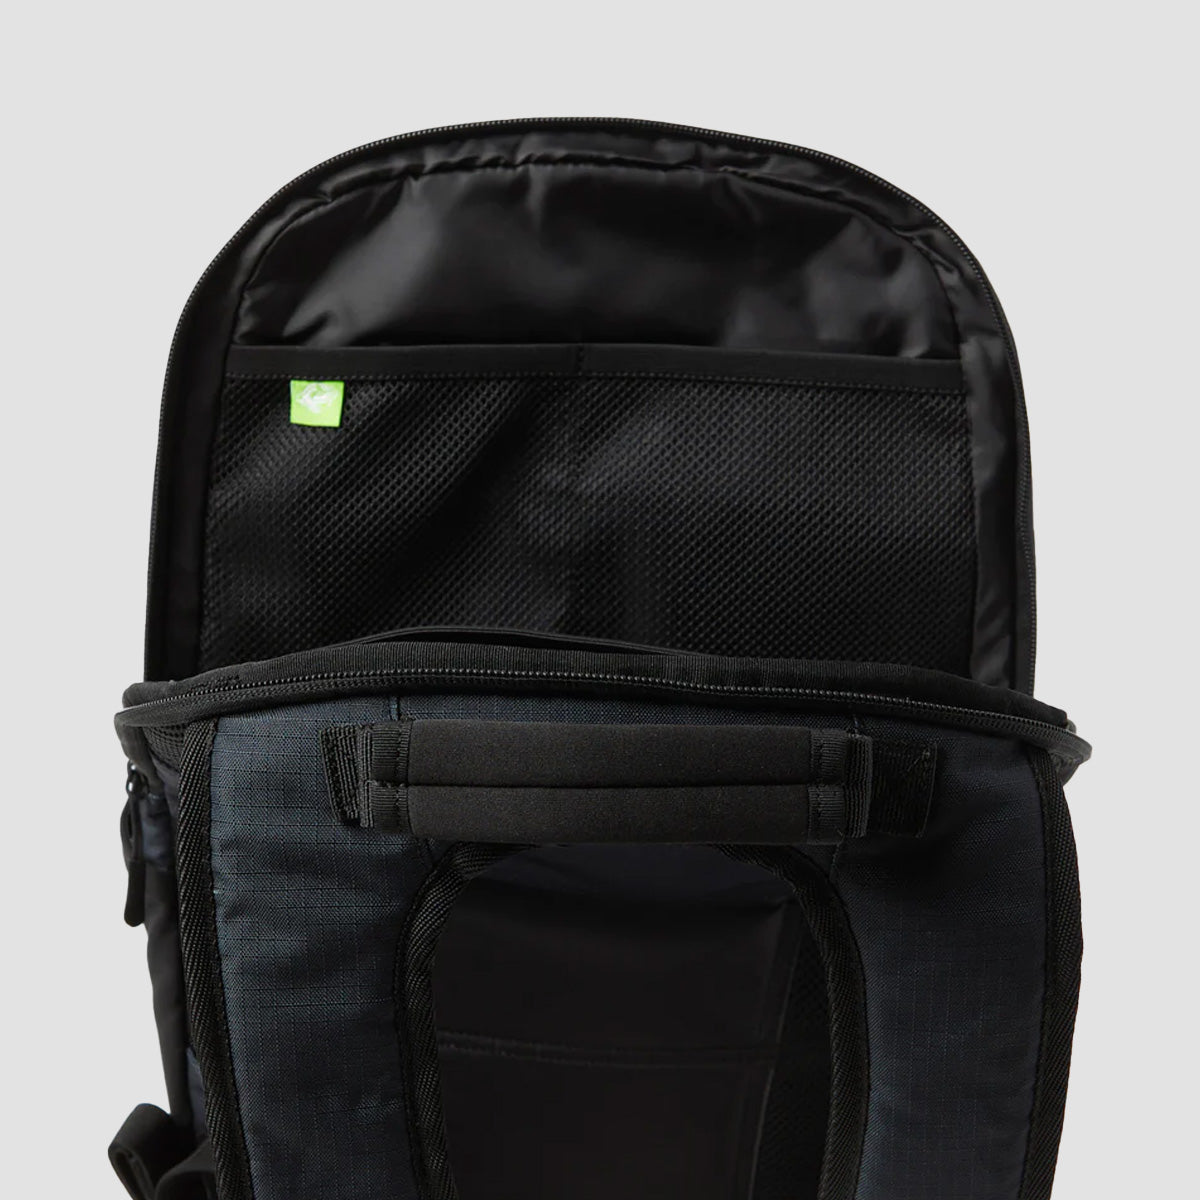 Quiksilver Freeday 20L Backpack Black